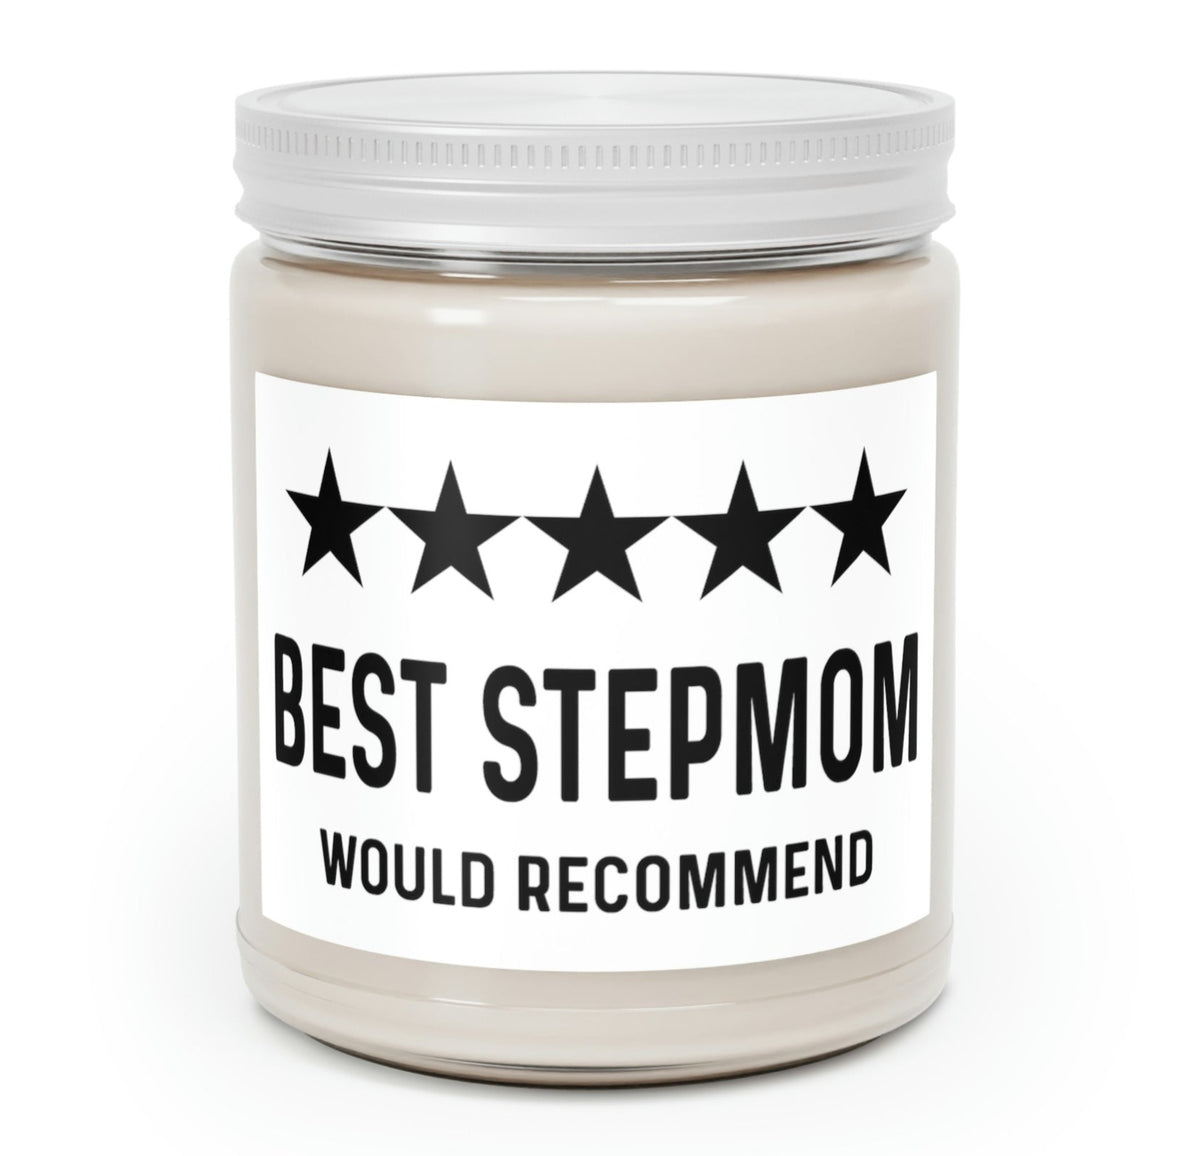 Best Stepmom Candle - Would Recommend